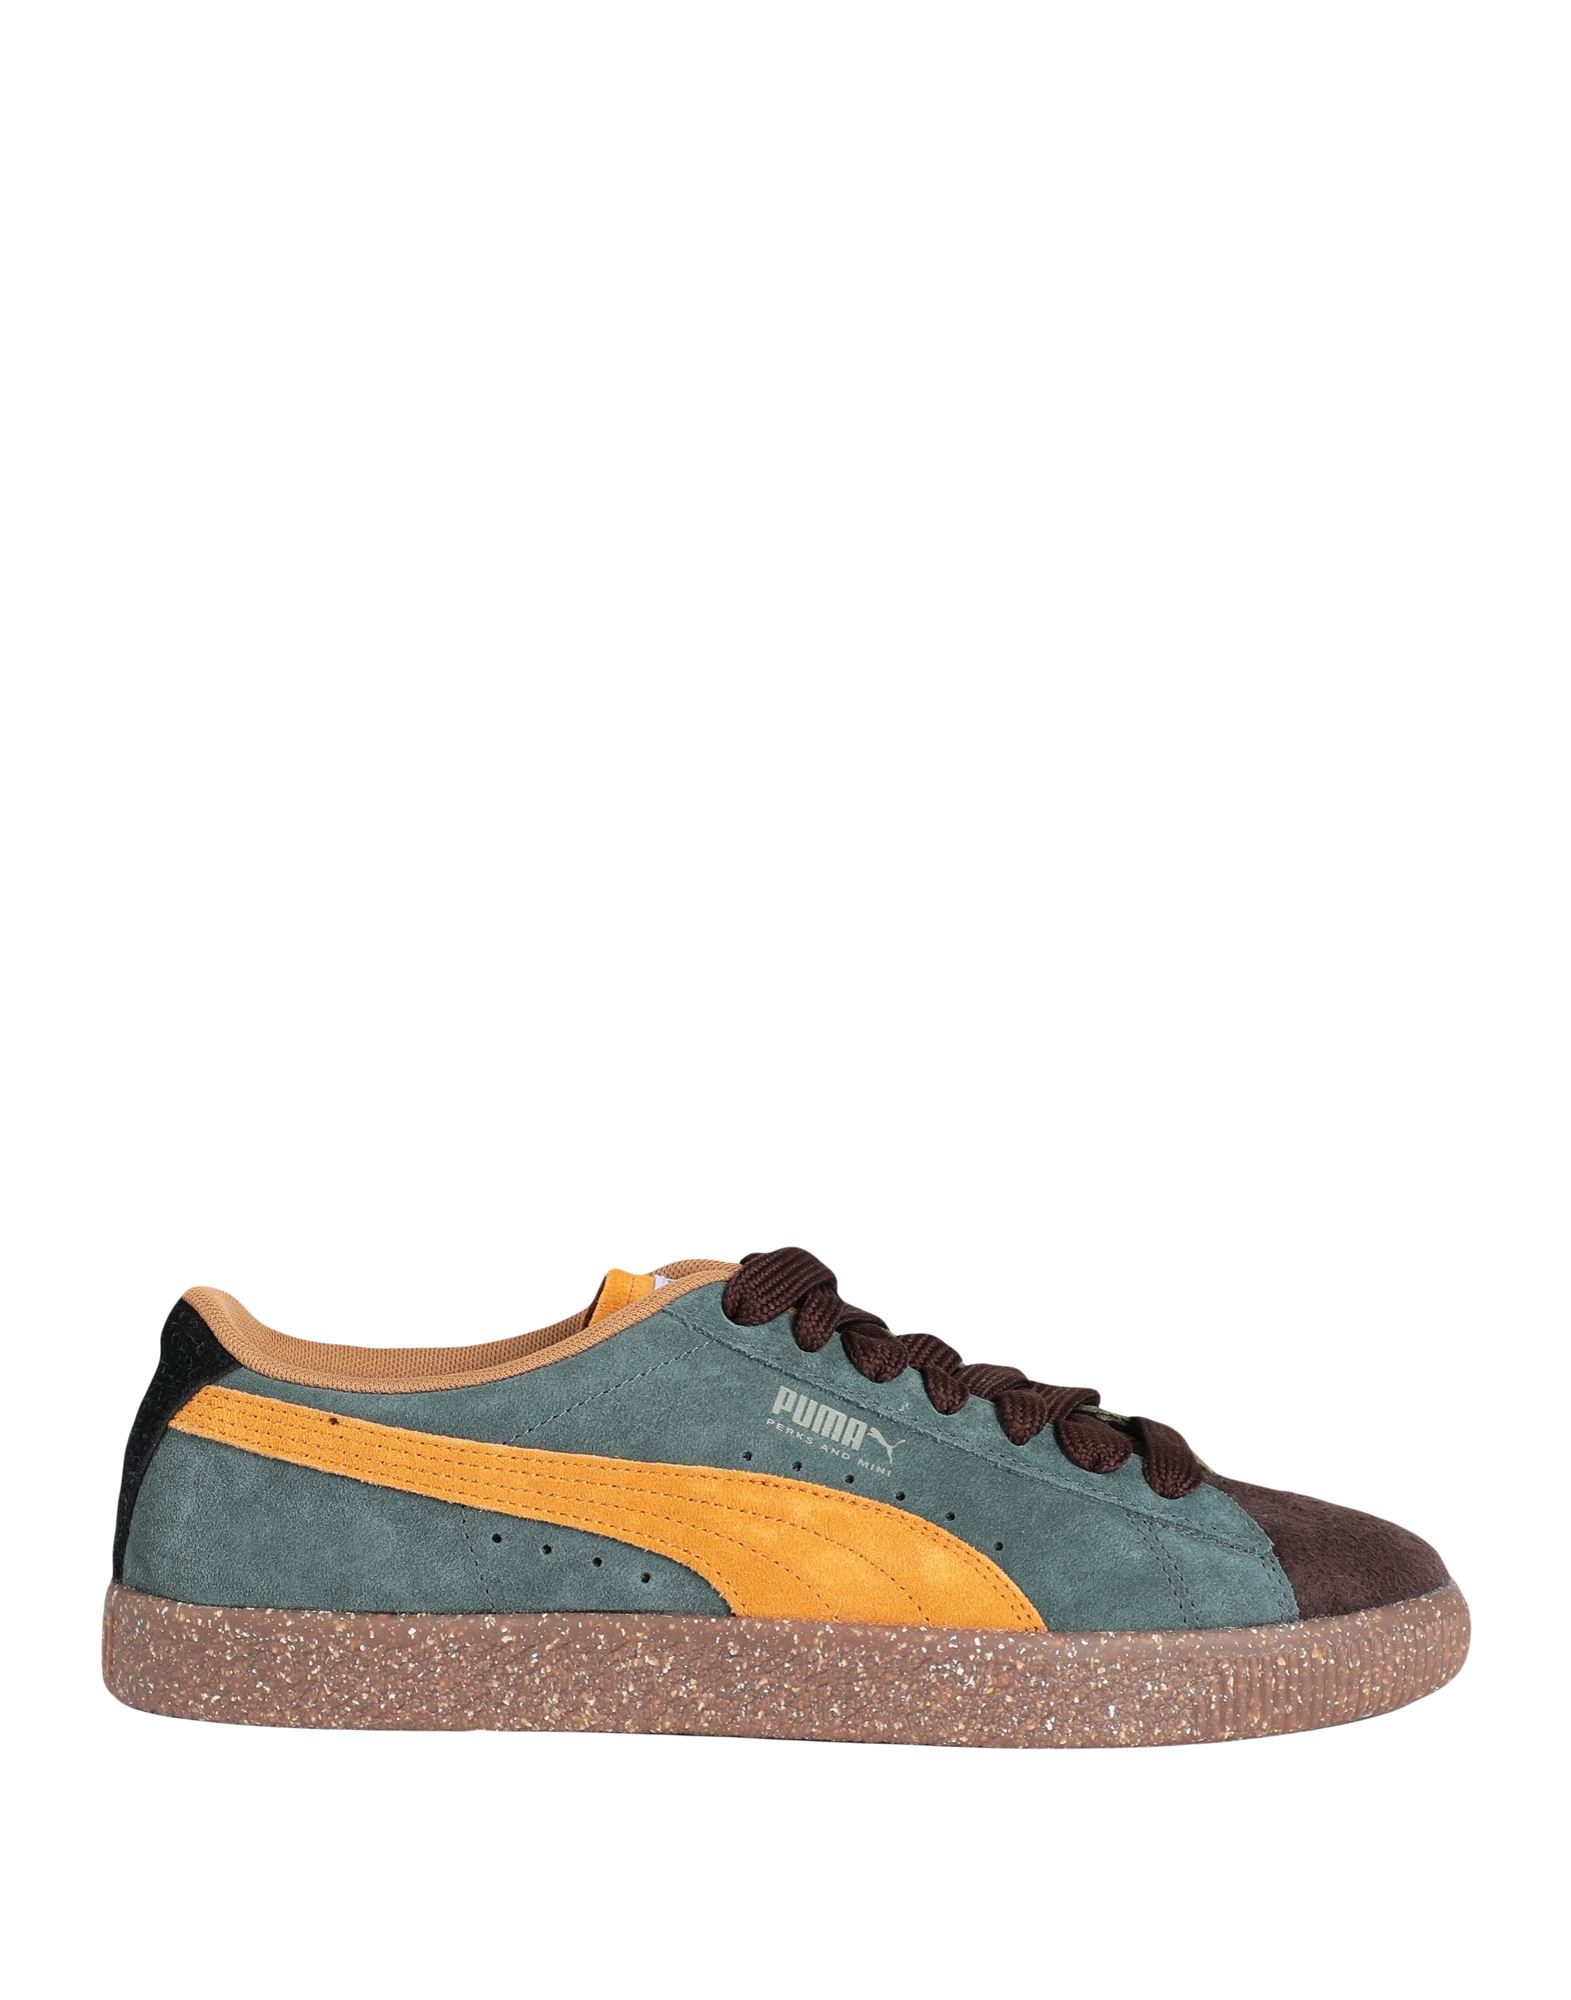 Puma X P.a.m. Perks And Mini Sneakers In Yellow